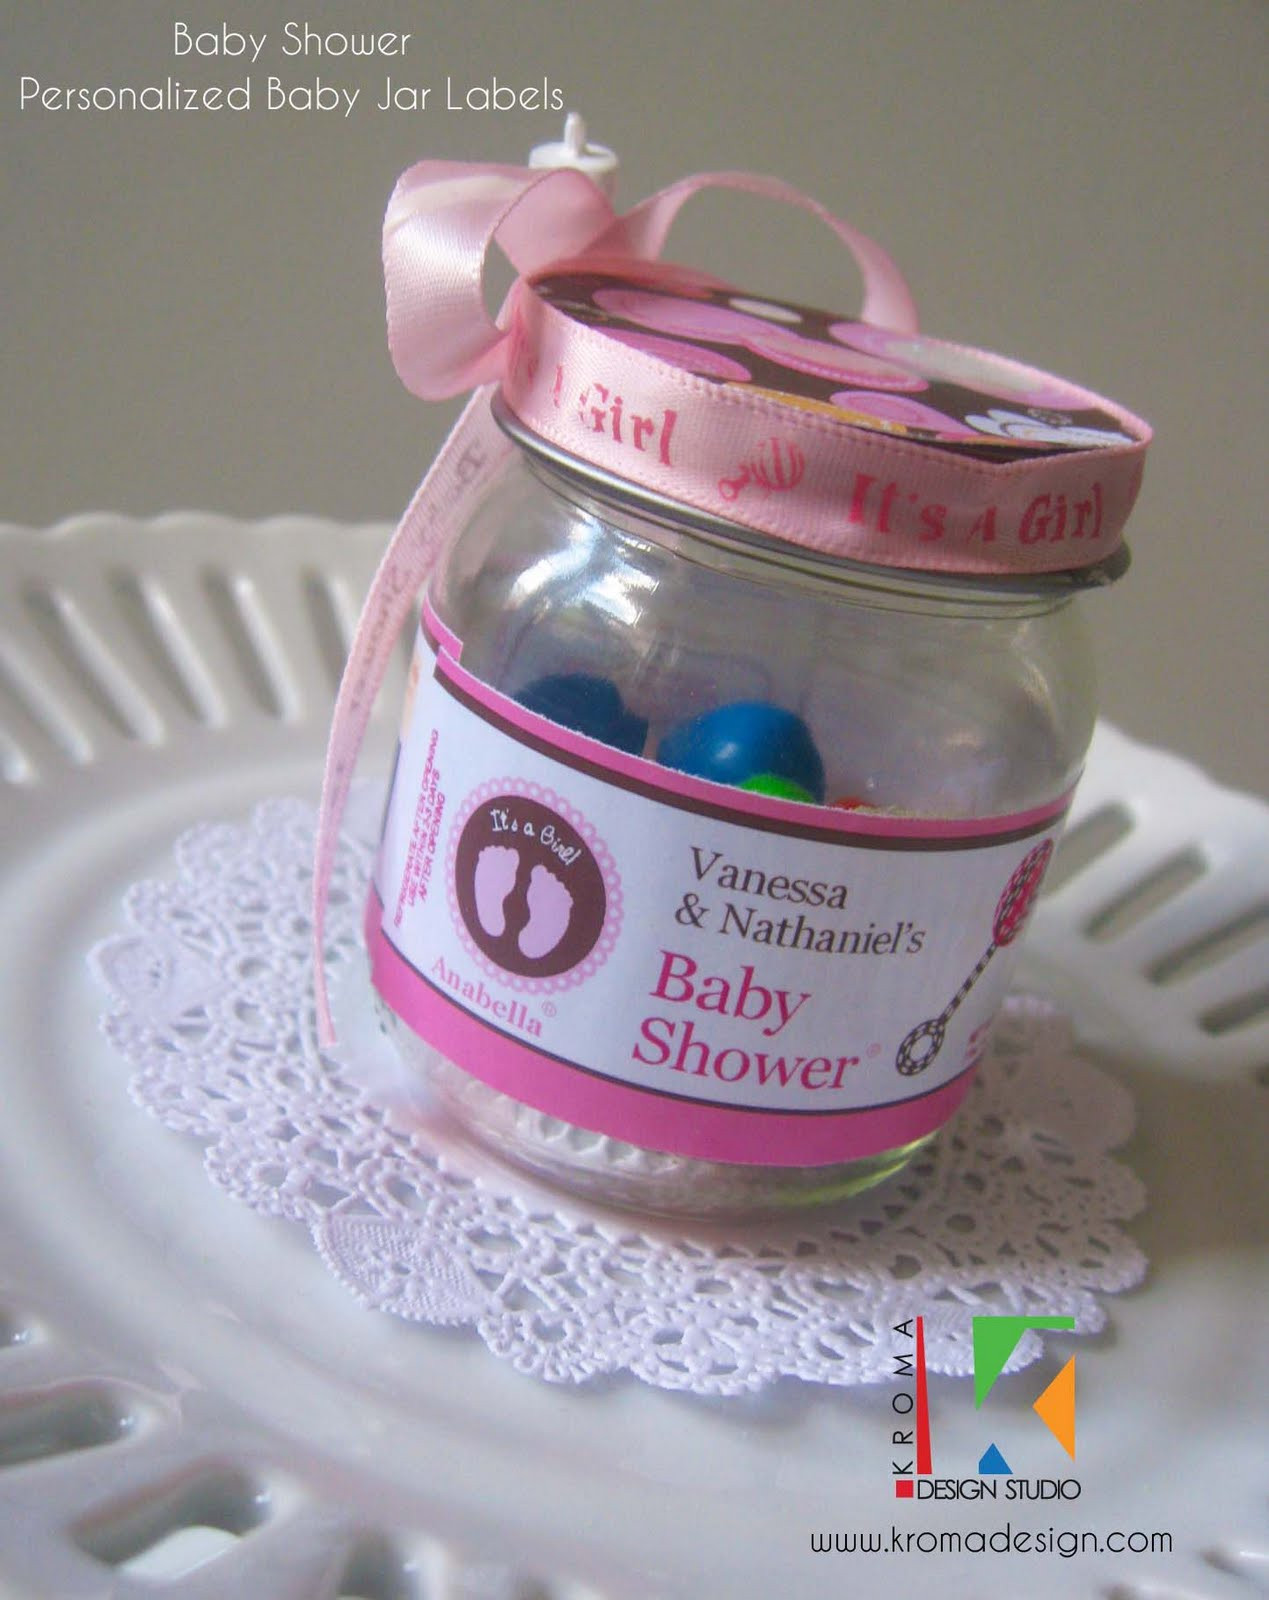 Baby Shower Party Favors DIY
 Baby Showers DIY Printable Baby Jar Label Favors for